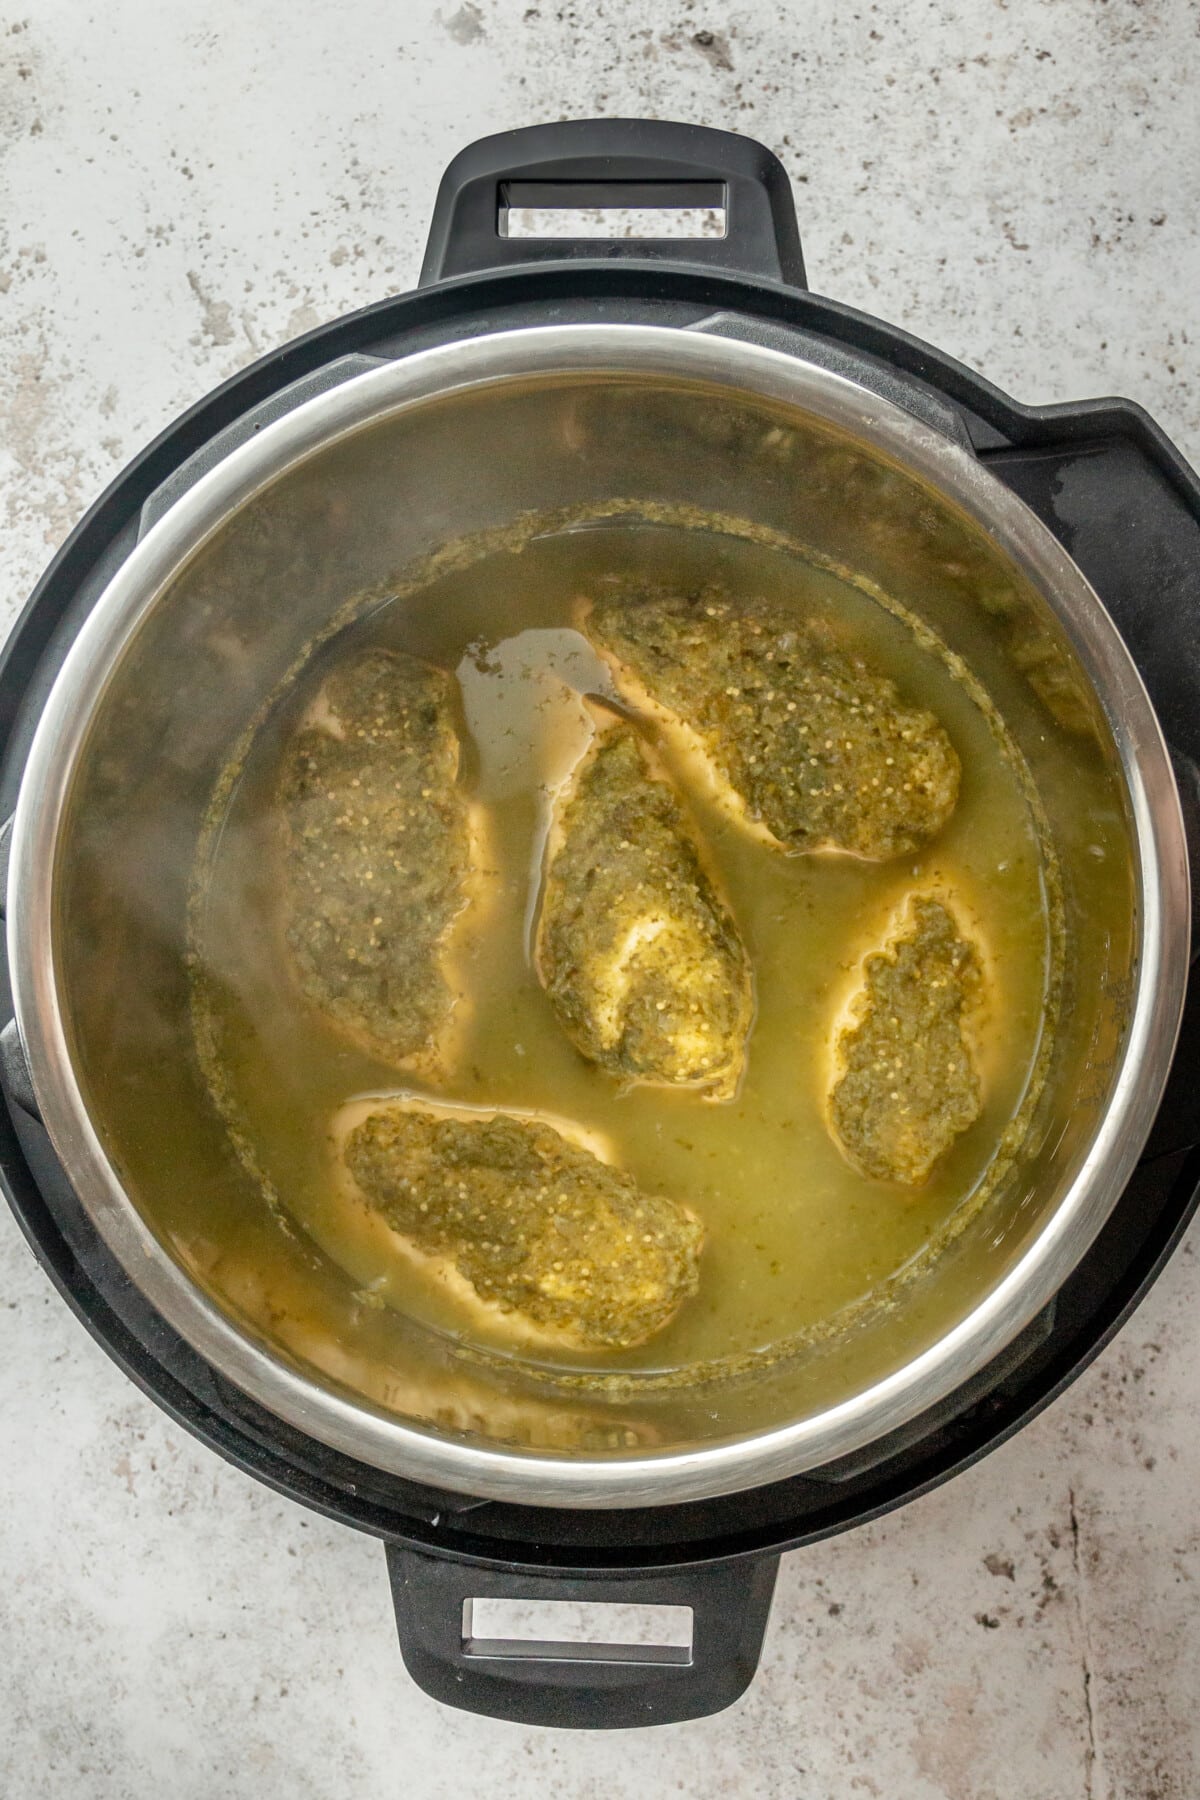 Salsa chicken breasts sit in an instant pot coated in salsa verde on a light grey surface.